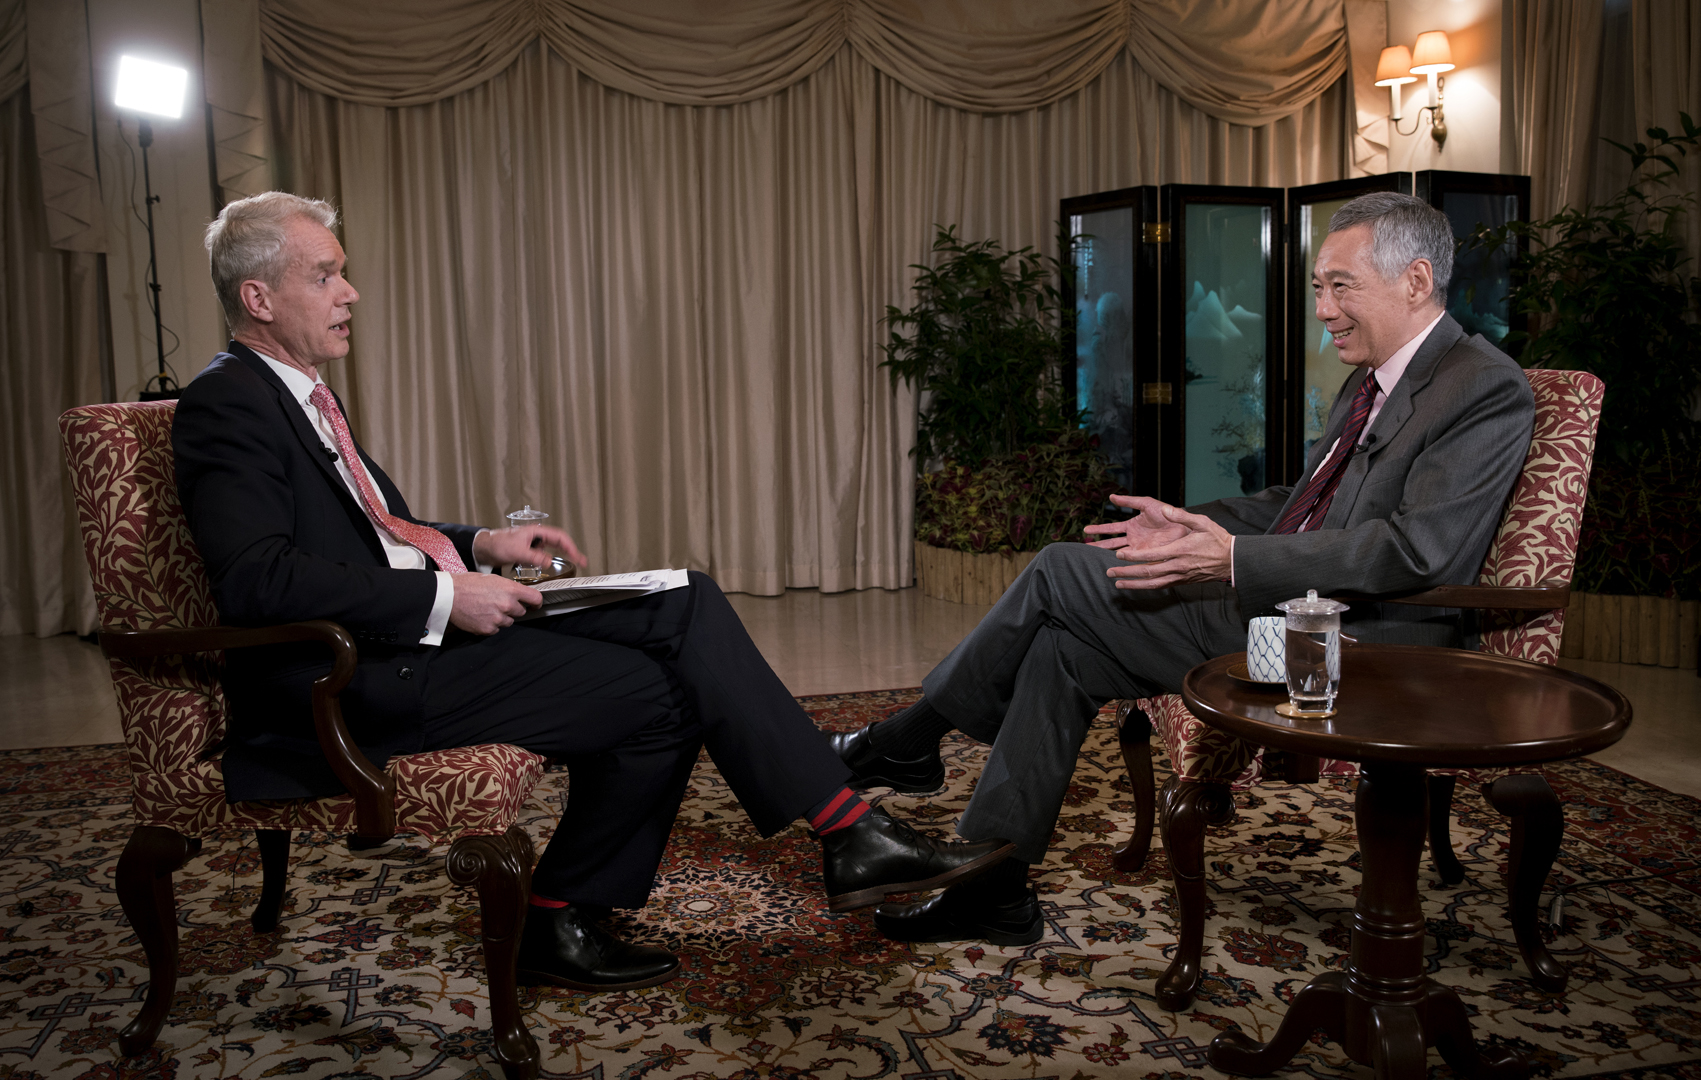 PM Lee Hsien Loong at interview with BBC HARDtalk on 23 Feb 2017 (MCI Photo by Terence Tan)